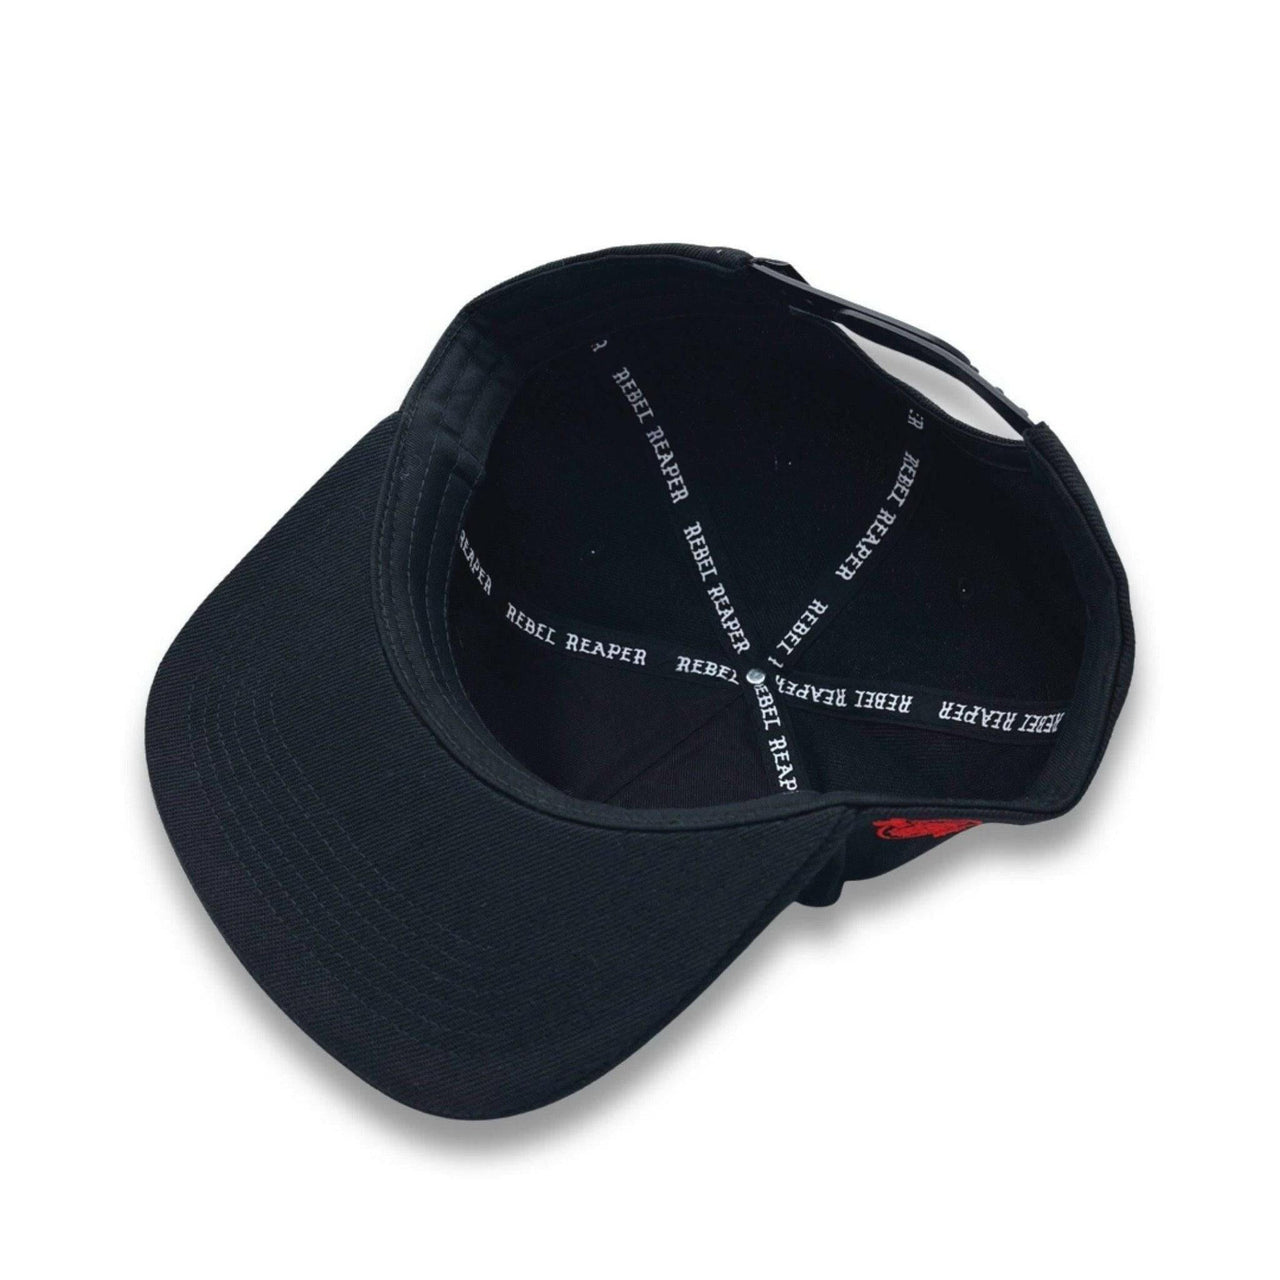 Tattoo Rose Embroidered Snapback - Rebel Reaper Clothing Company Hats - Snapback